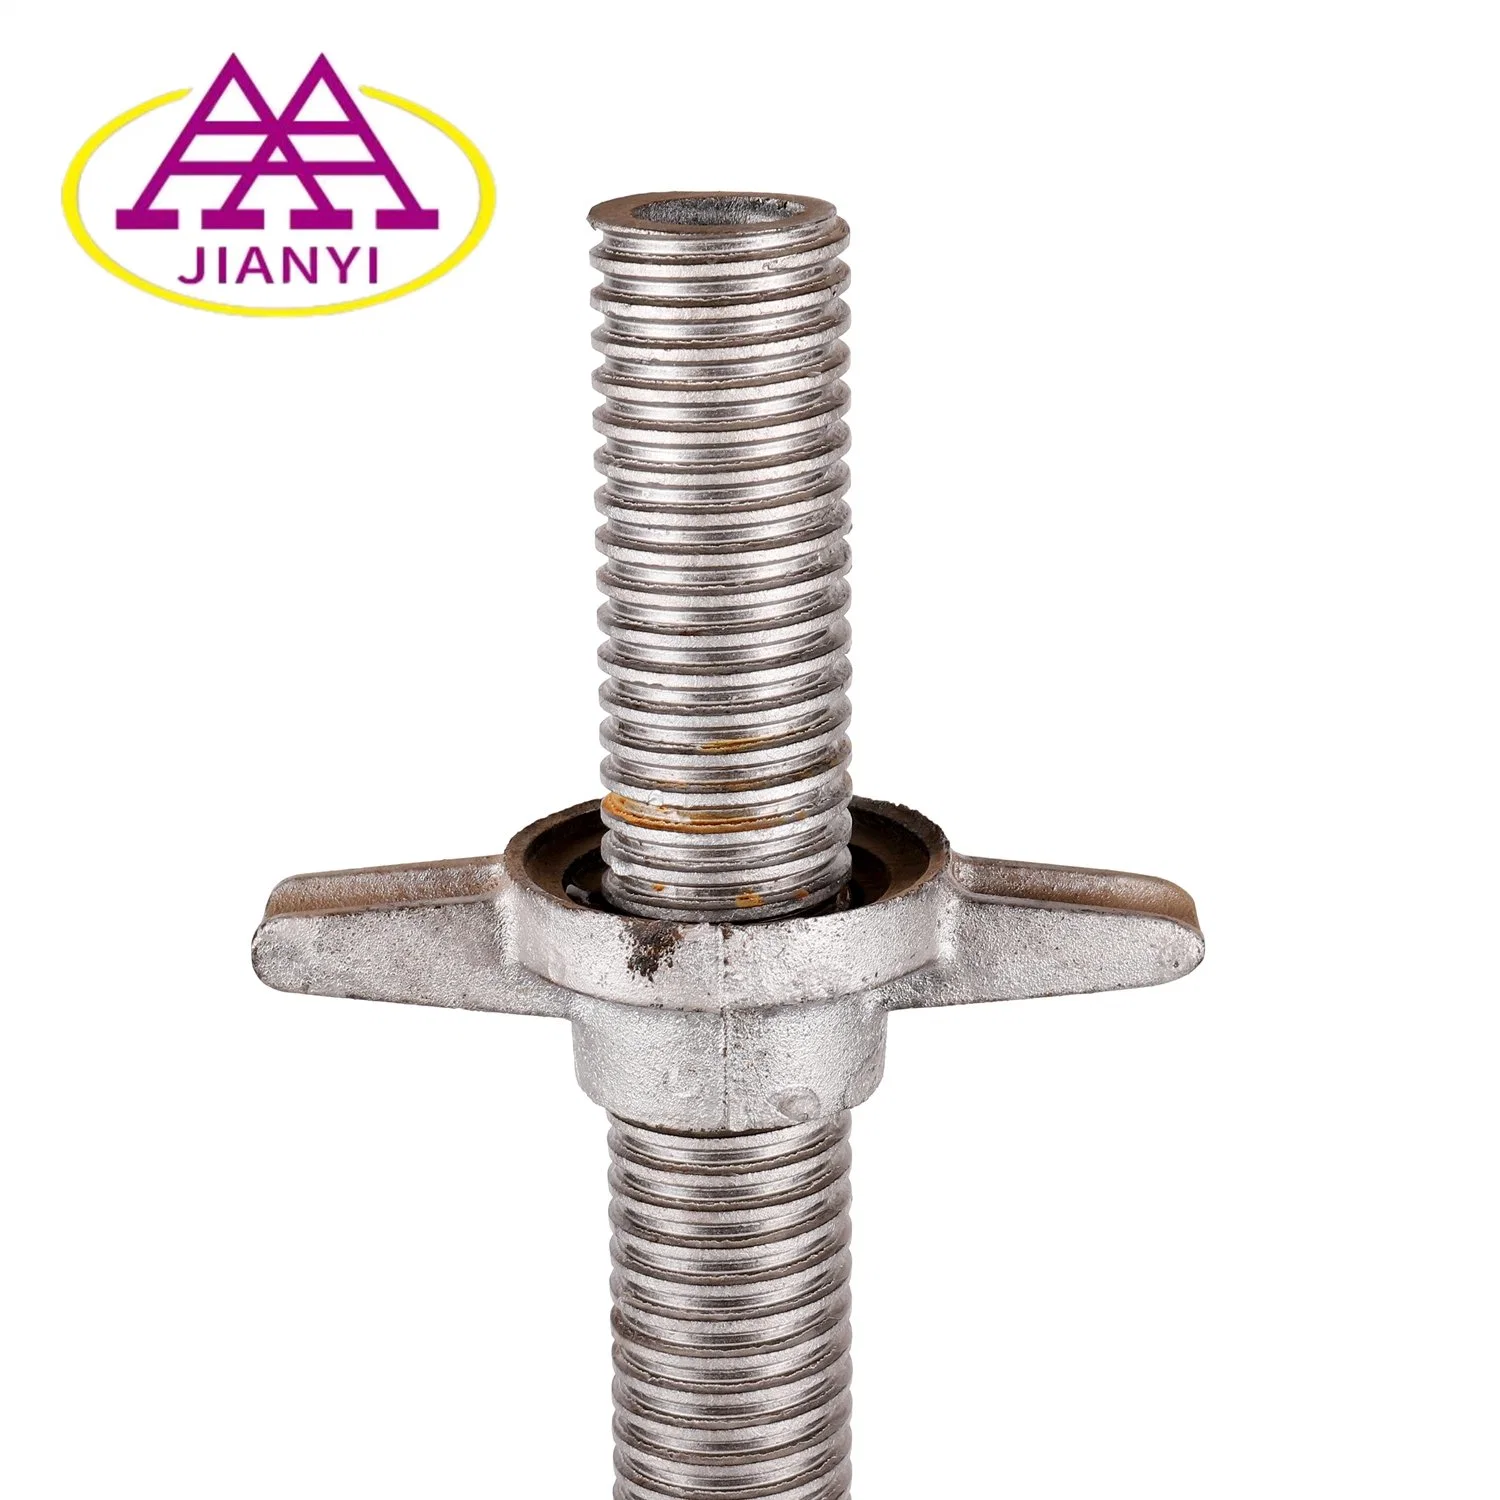 Scaffolding Adjustment Small Pipe Screw Jack Base Stands